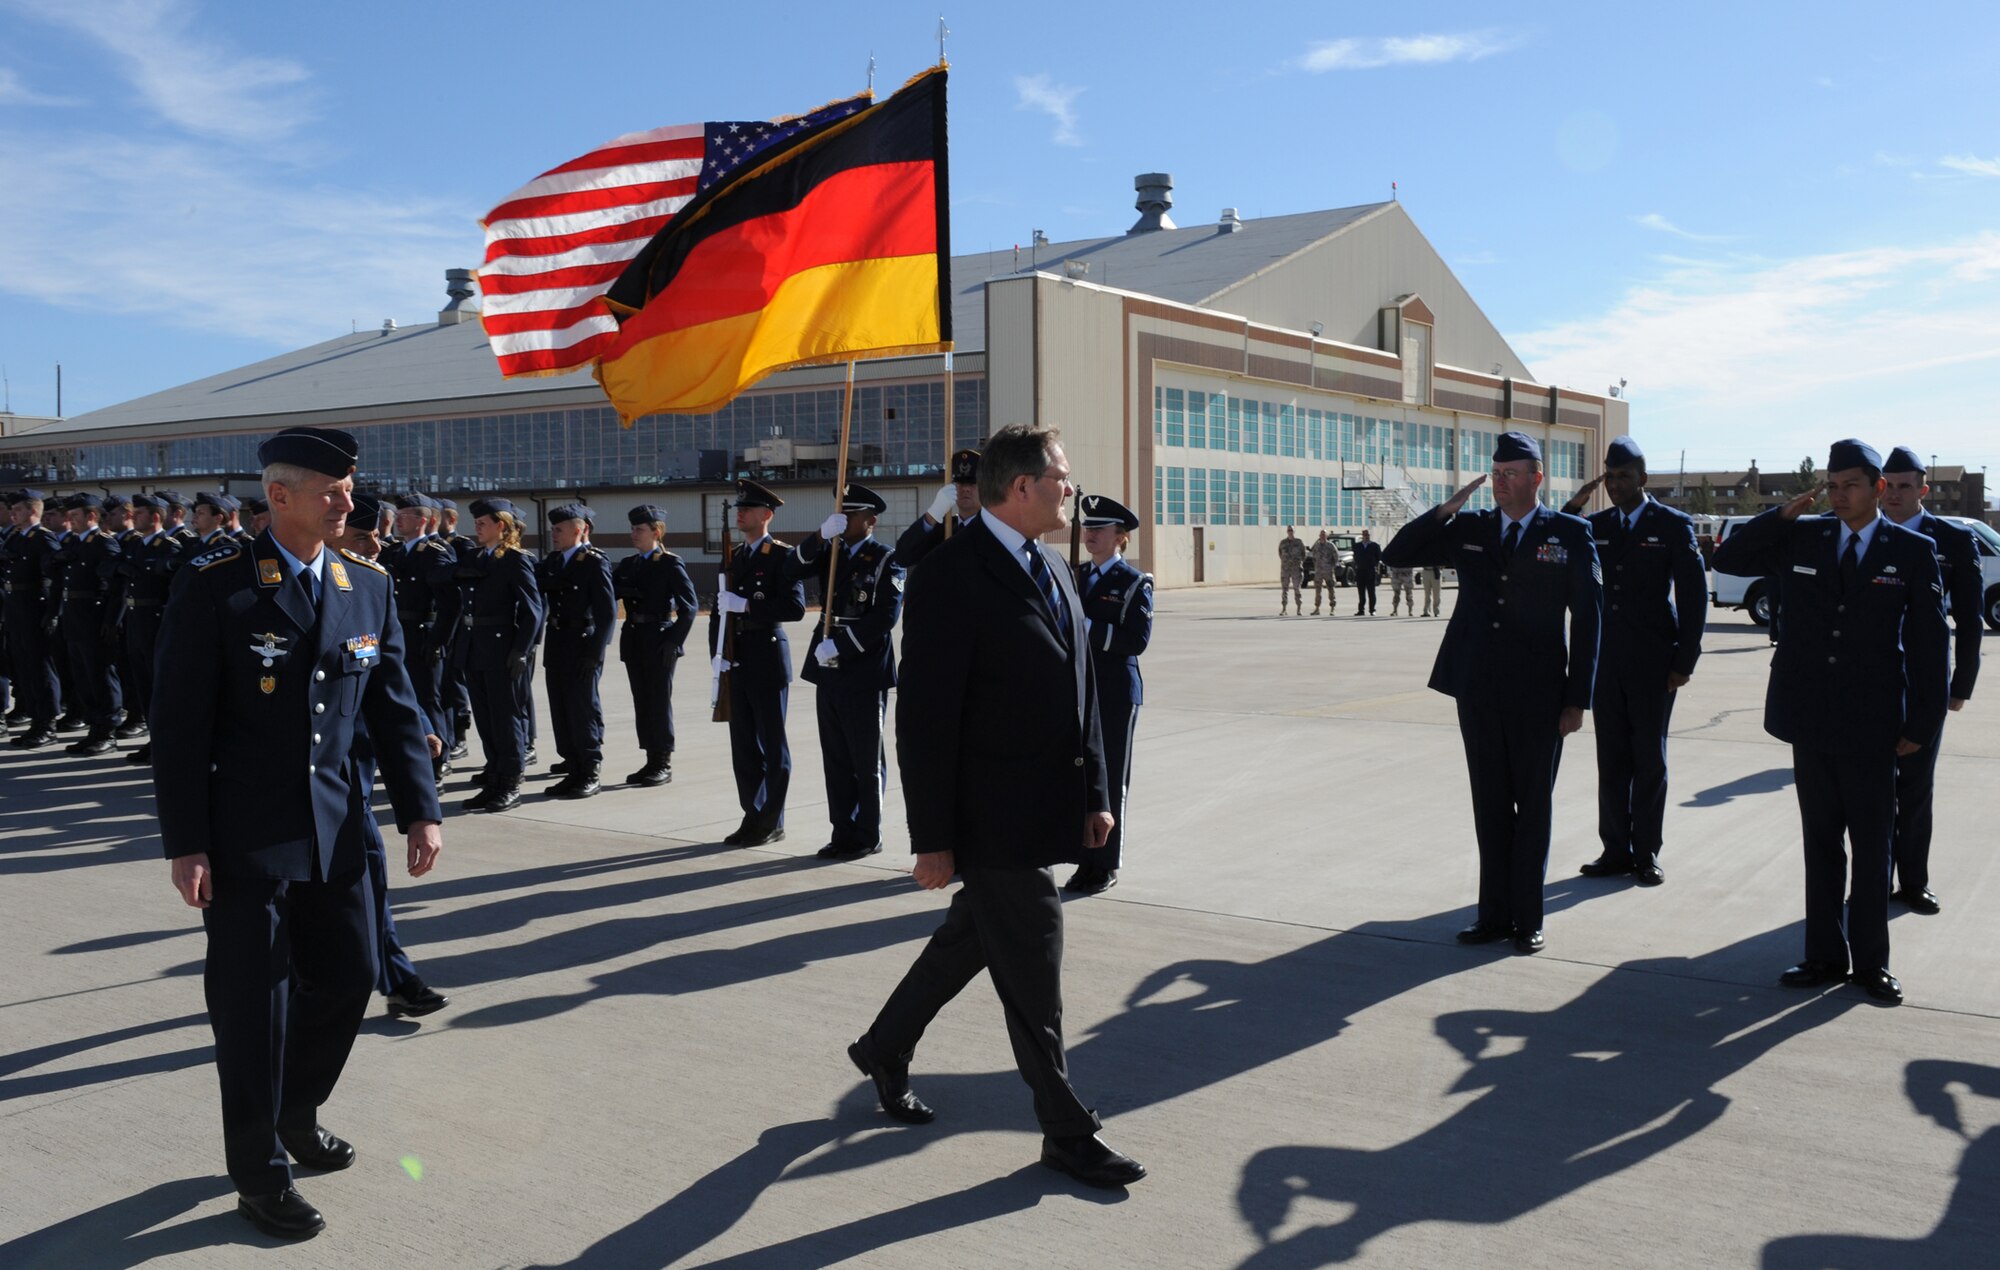 Airmen from the 49th Fighter Wing and the German Air Force Flying Training Center, salute Minister Franz Josef Jung, German Minister of Defense, as he walks past them at Holloman Air Force Base, N.M., Nov. 24. Minister Jung came to visit Holloman to see the German Air Force Flying Training Center. The German air force has been training its aircrews throughout the United States since 1958 before it was moved to Holloman in 1992. (U.S. Air Force photo/Airman 1st Class Michael Means)